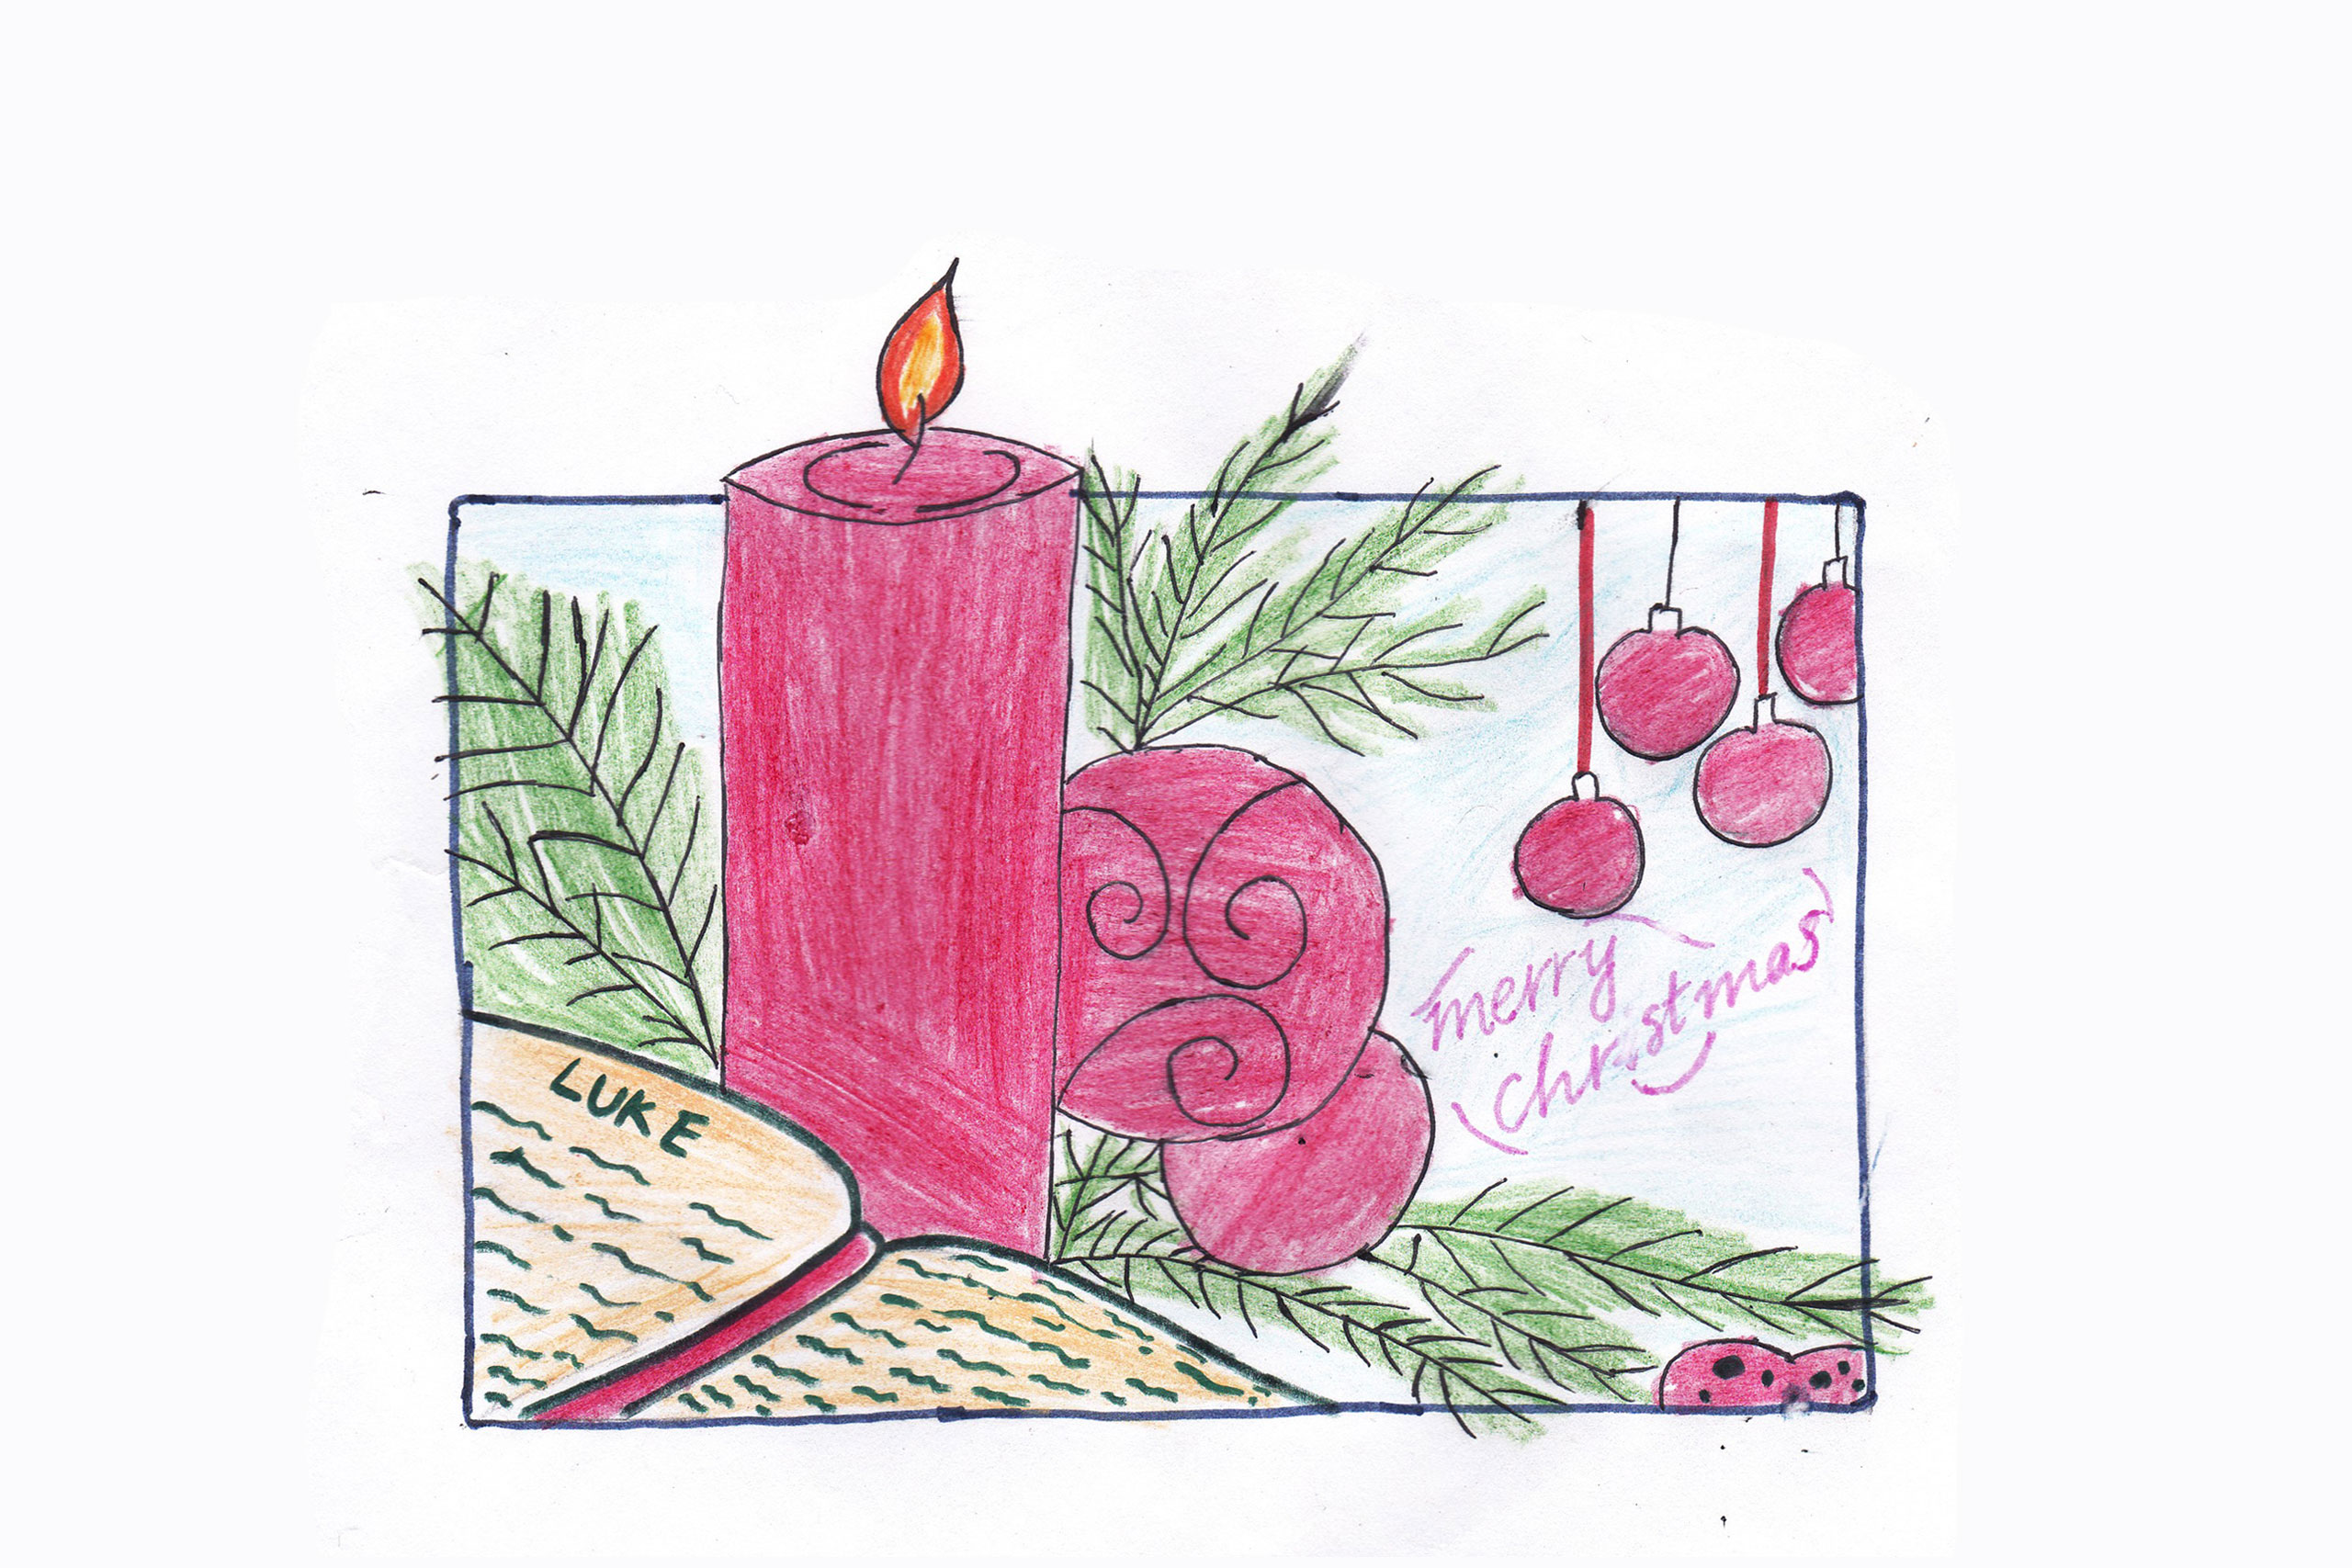 Child's drawing of an Advent candle